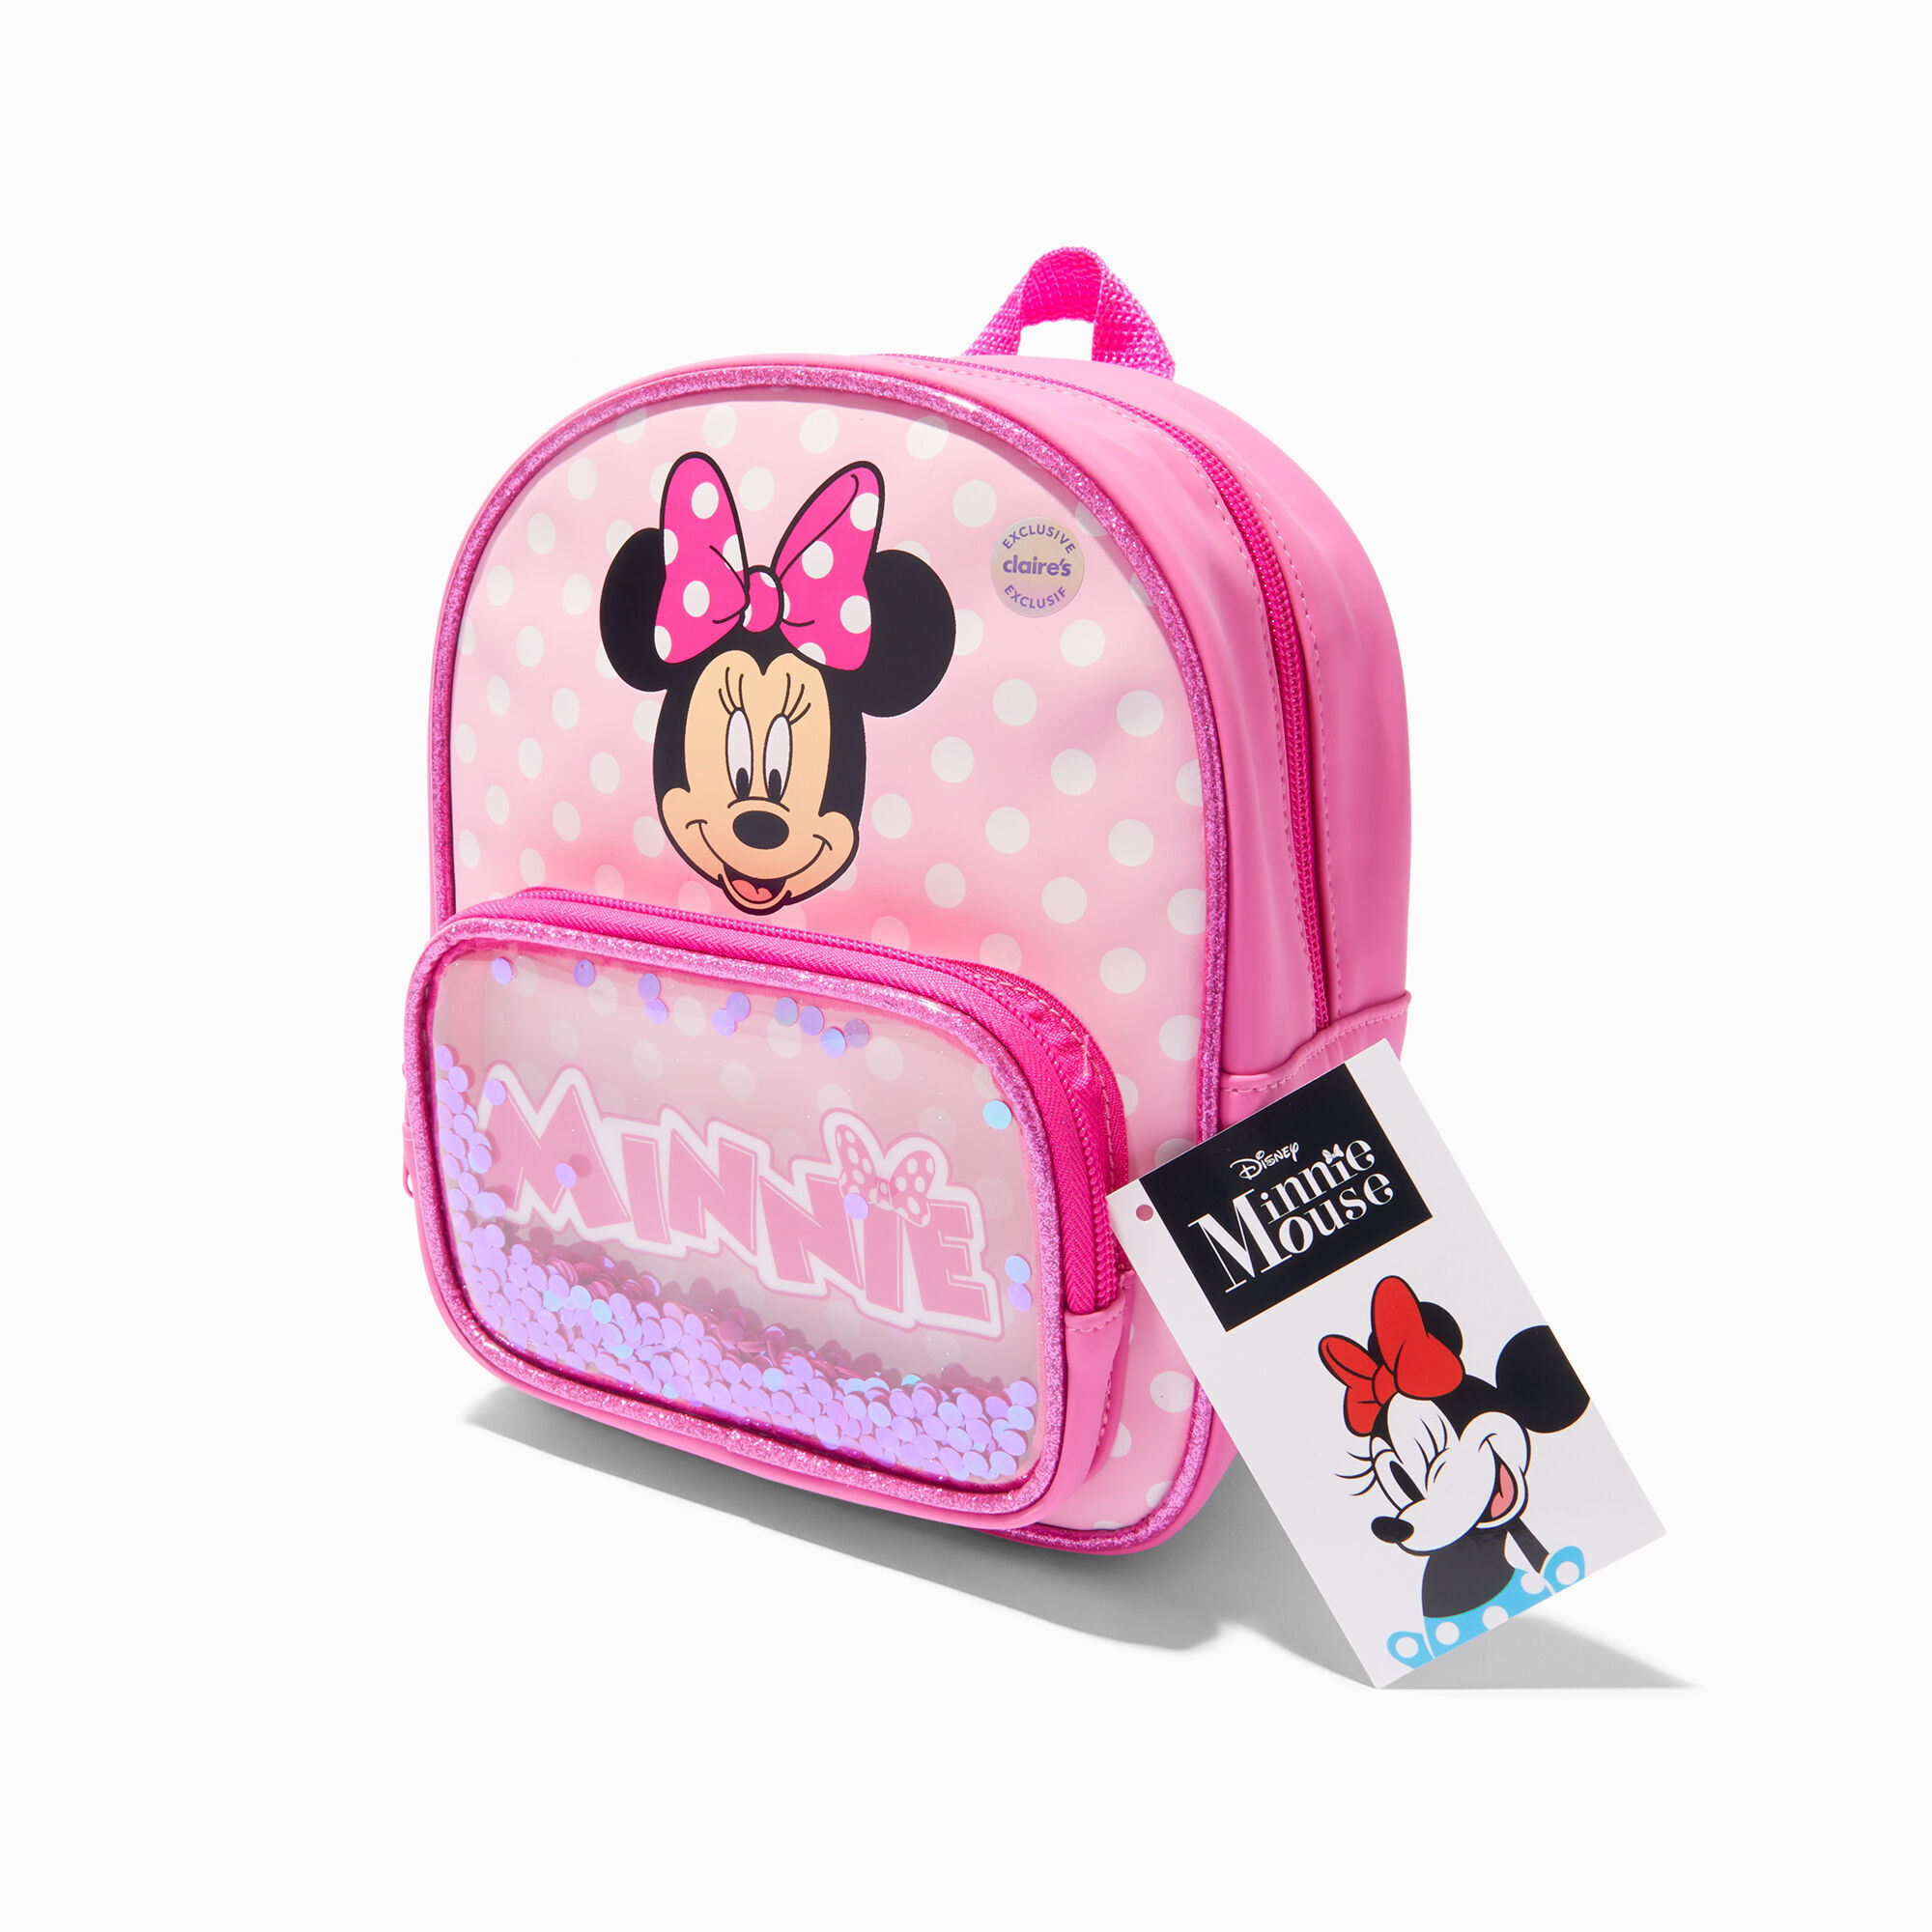 View Disney Minnie Mouse Claires Exclusive Confetti Mini Backpack Pink information